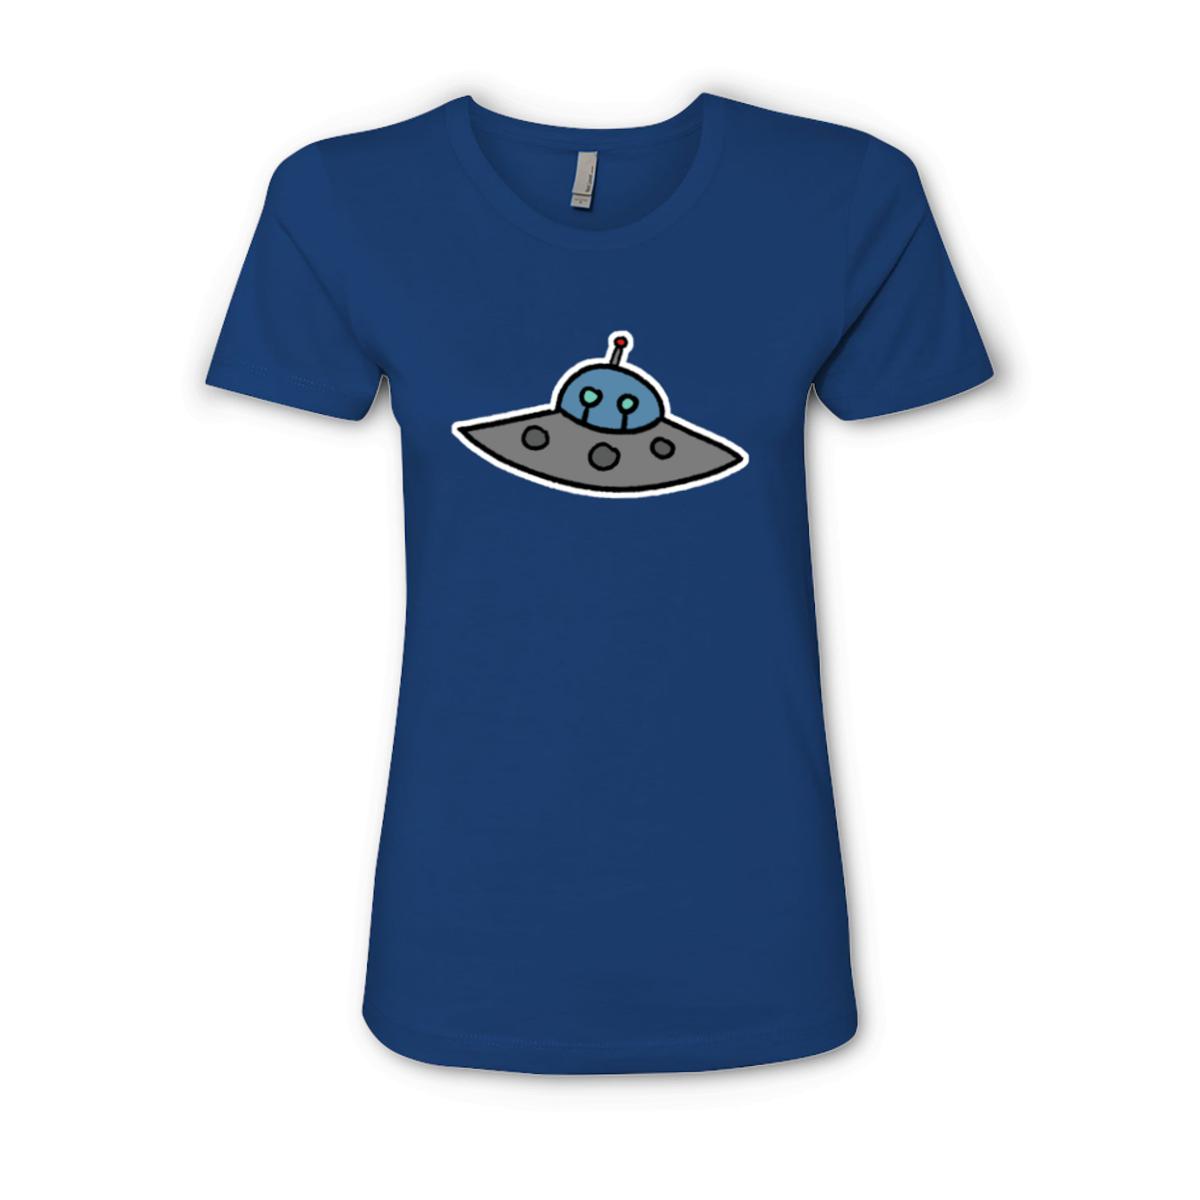 Flying Saucer Ladies' Boyfriend Tee Double Extra Large royal-blue